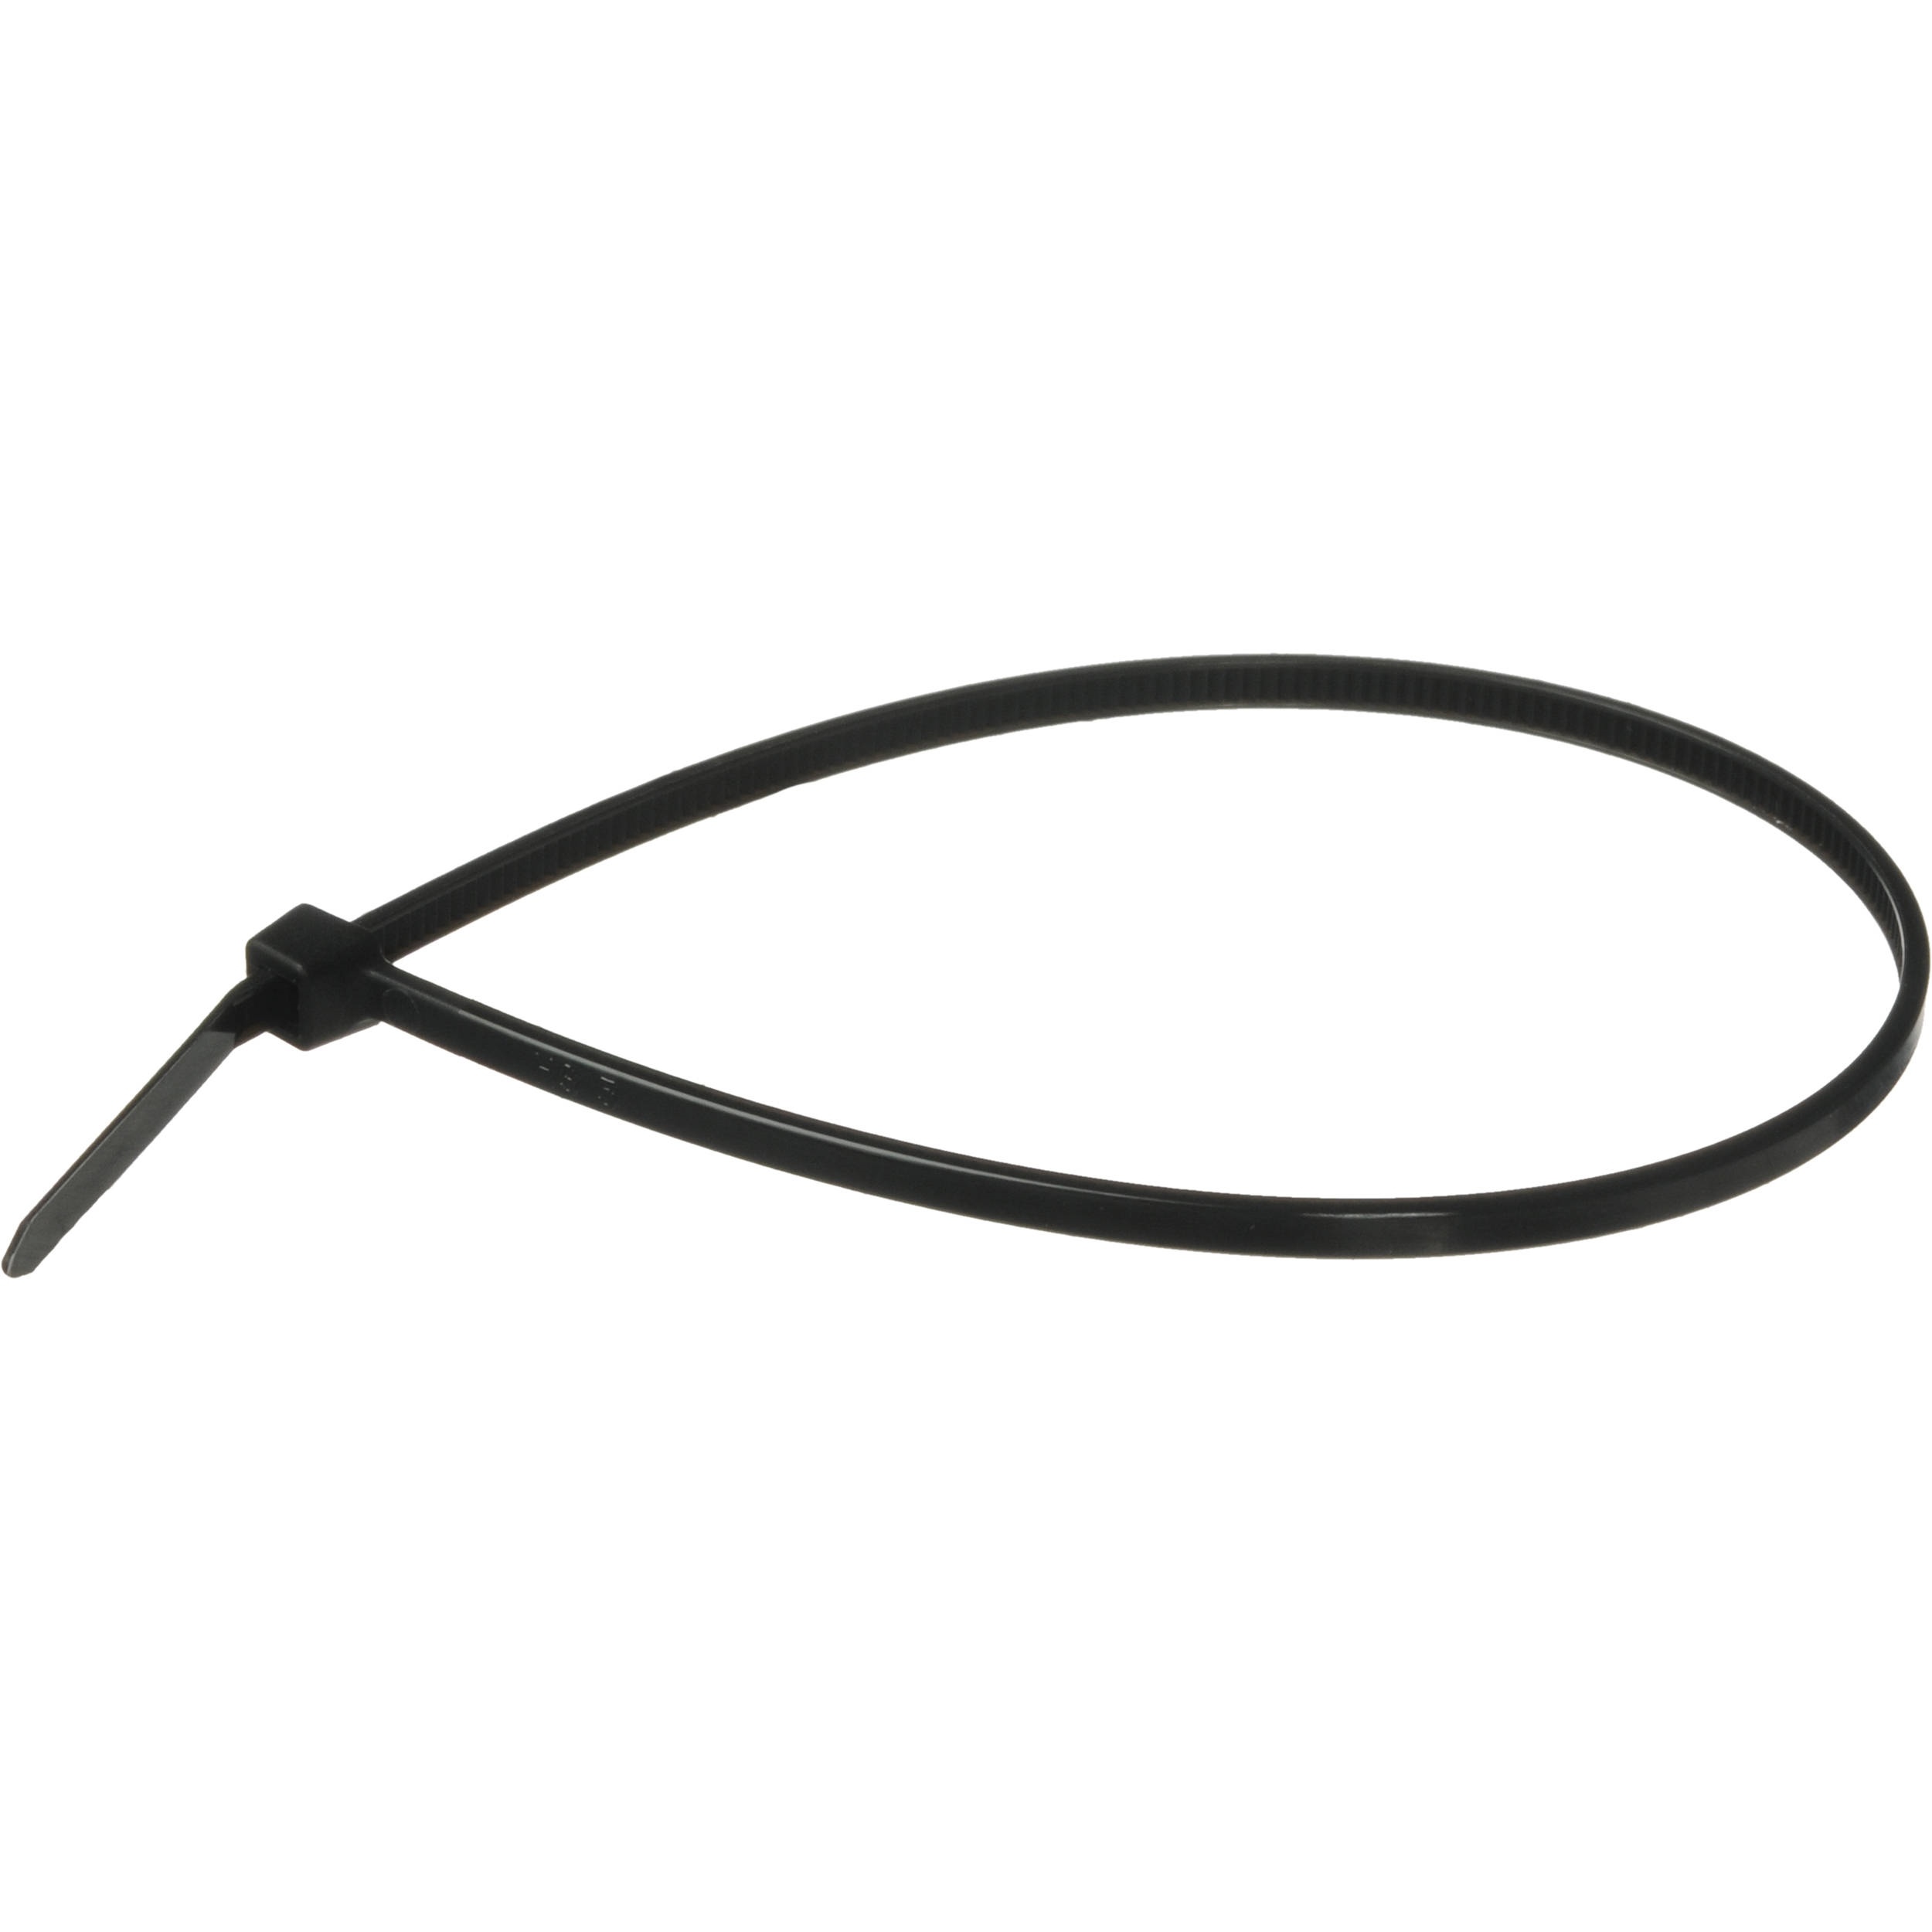 Pearstone 8" Plastic Cable Ties - Black (20-Pack)